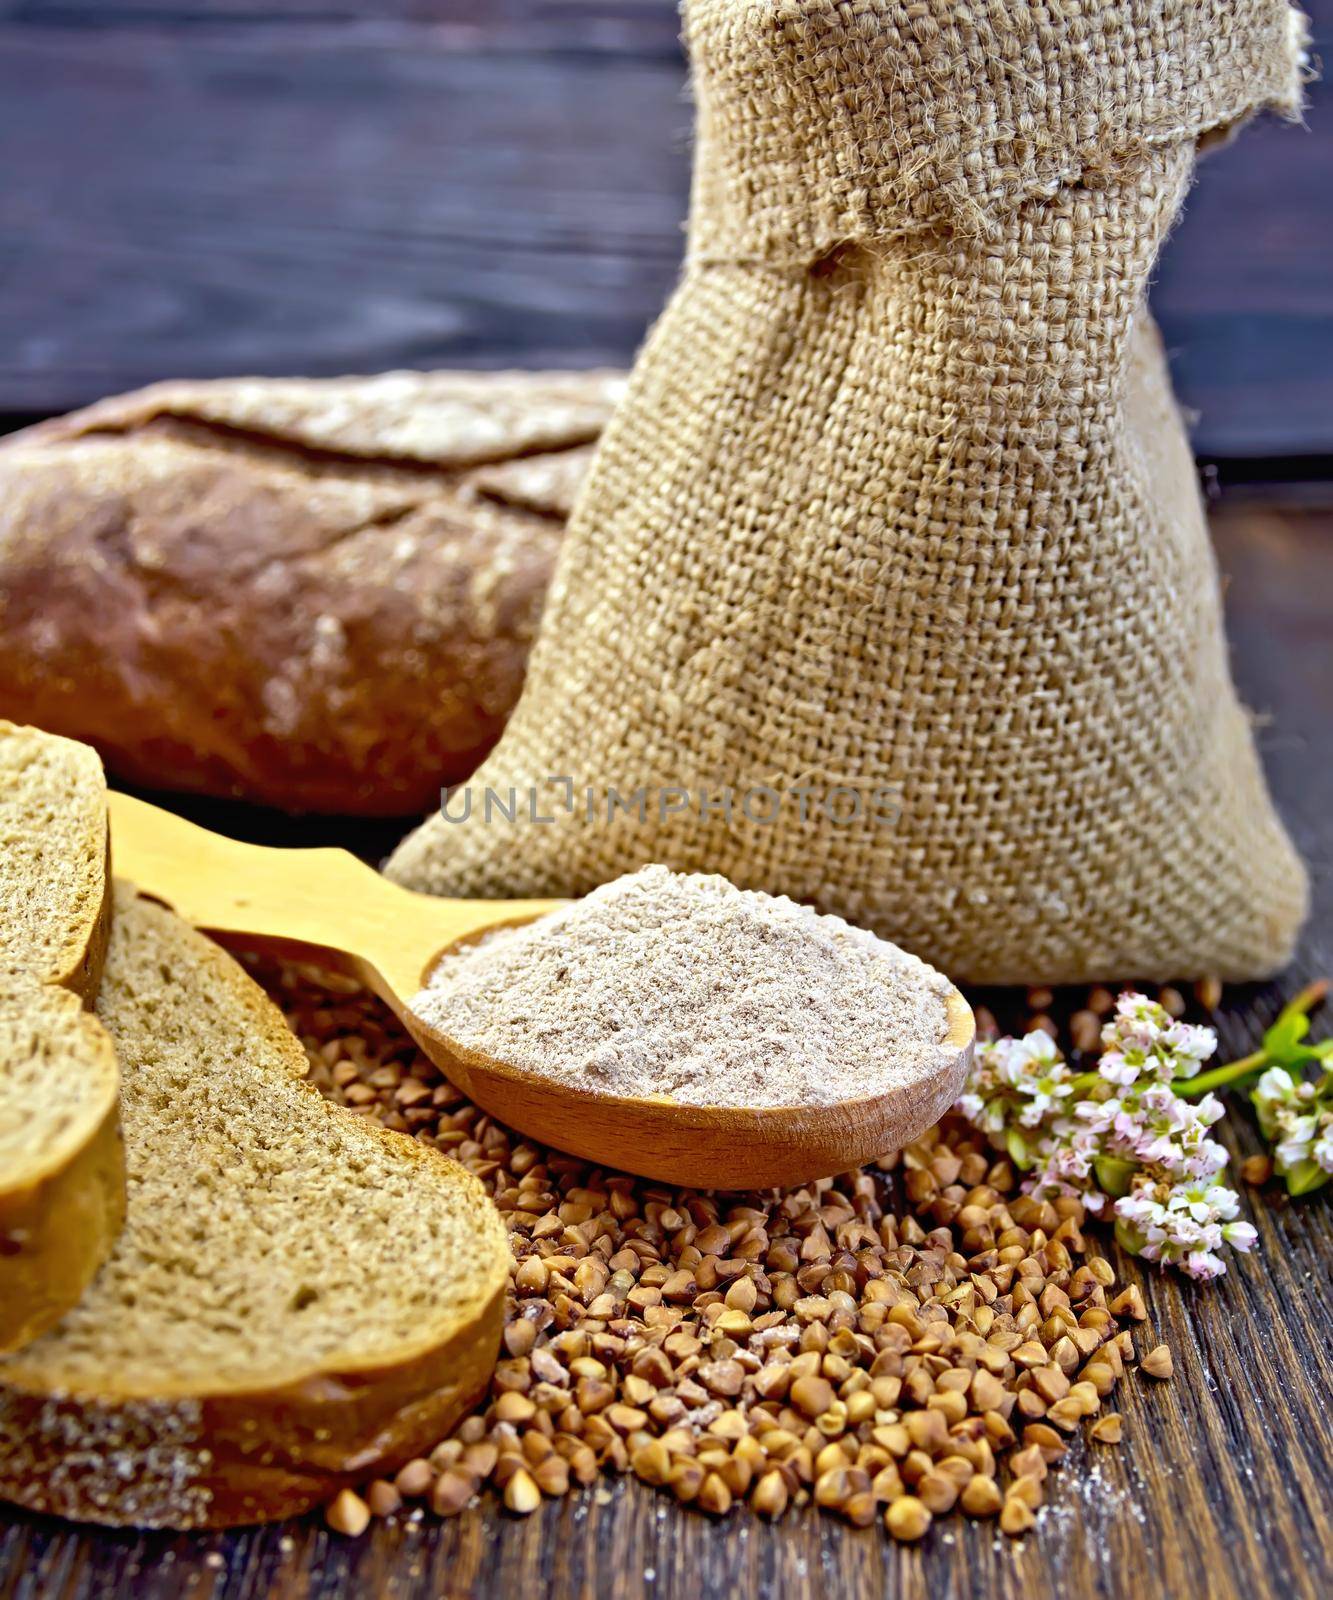 Buckwheat Flour in a wooden spoon, buckwheat in the bag, slices of bread, buckwheat flower on the background of wooden boards